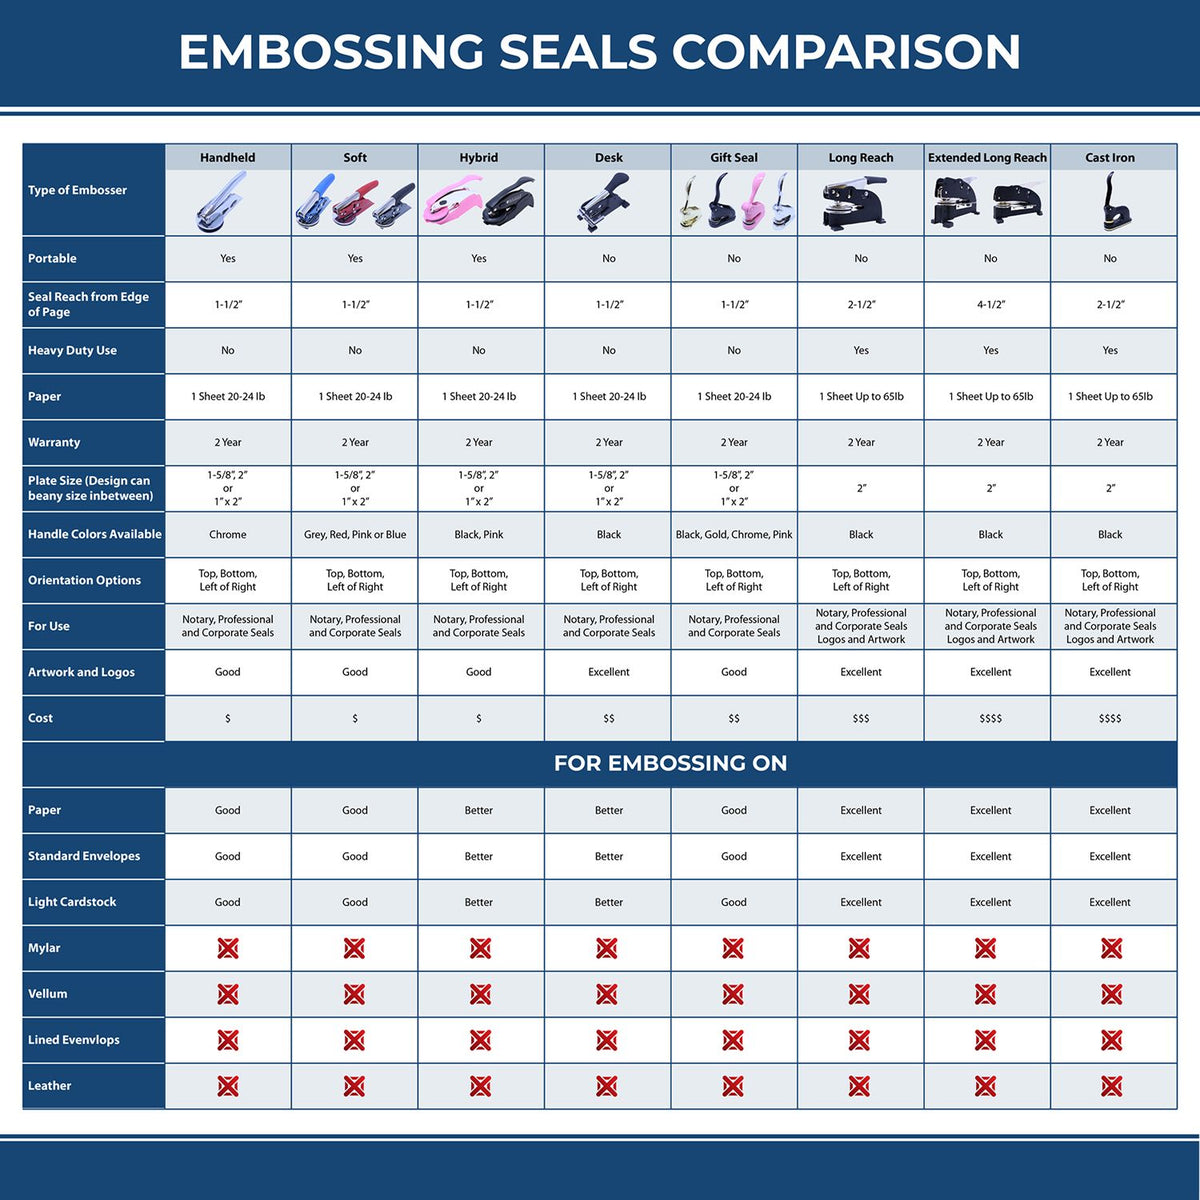 A comparison chart for the different types of mount models available for the Soft Pocket Michigan Landscape Architect Embosser.